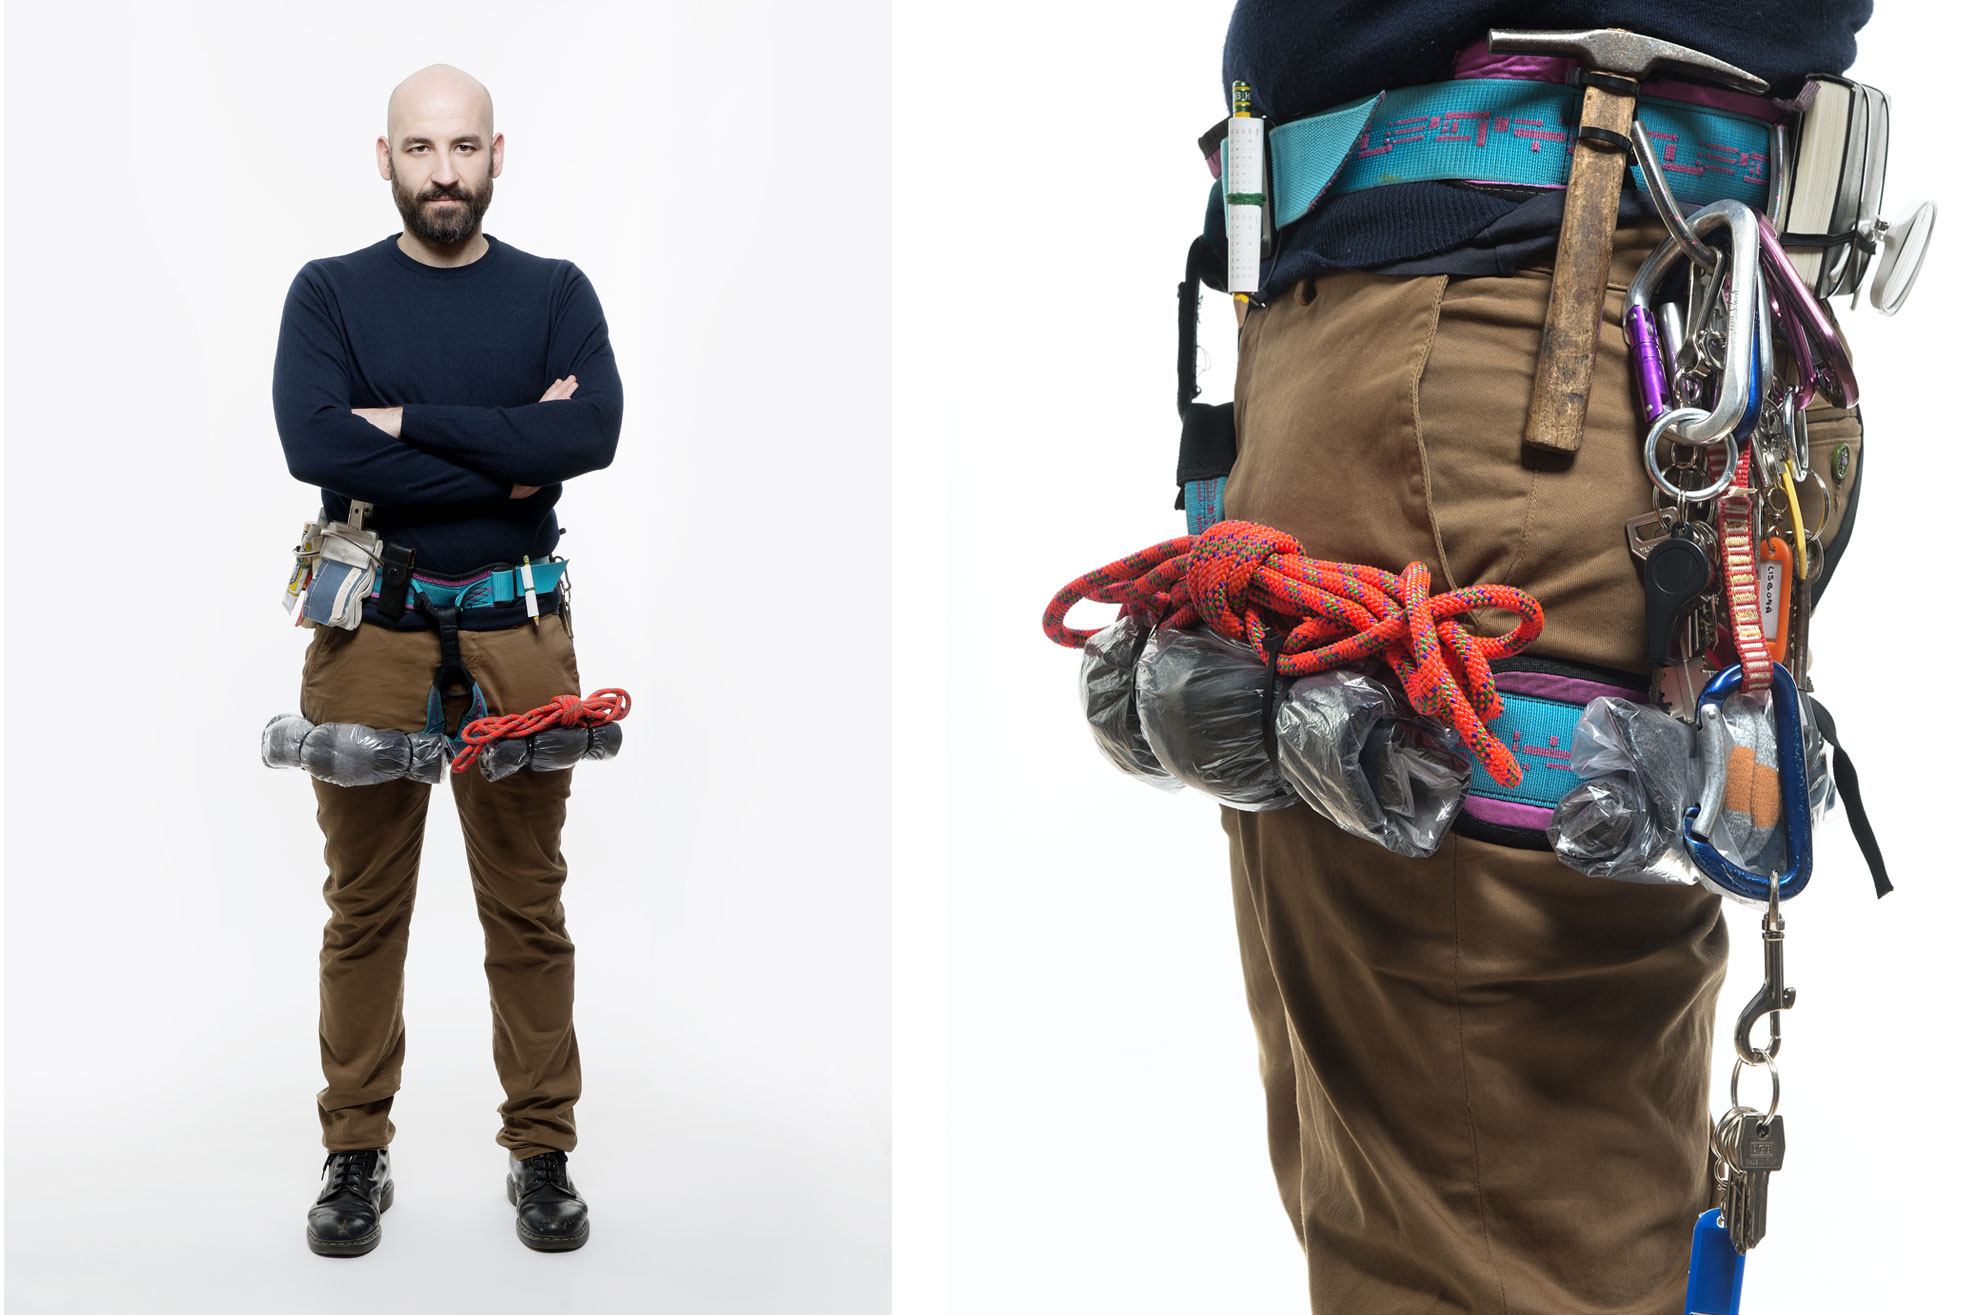 Photo of a man with objects on his waist, the picture is part of Wearable Homes a design project by Denise Bonapace